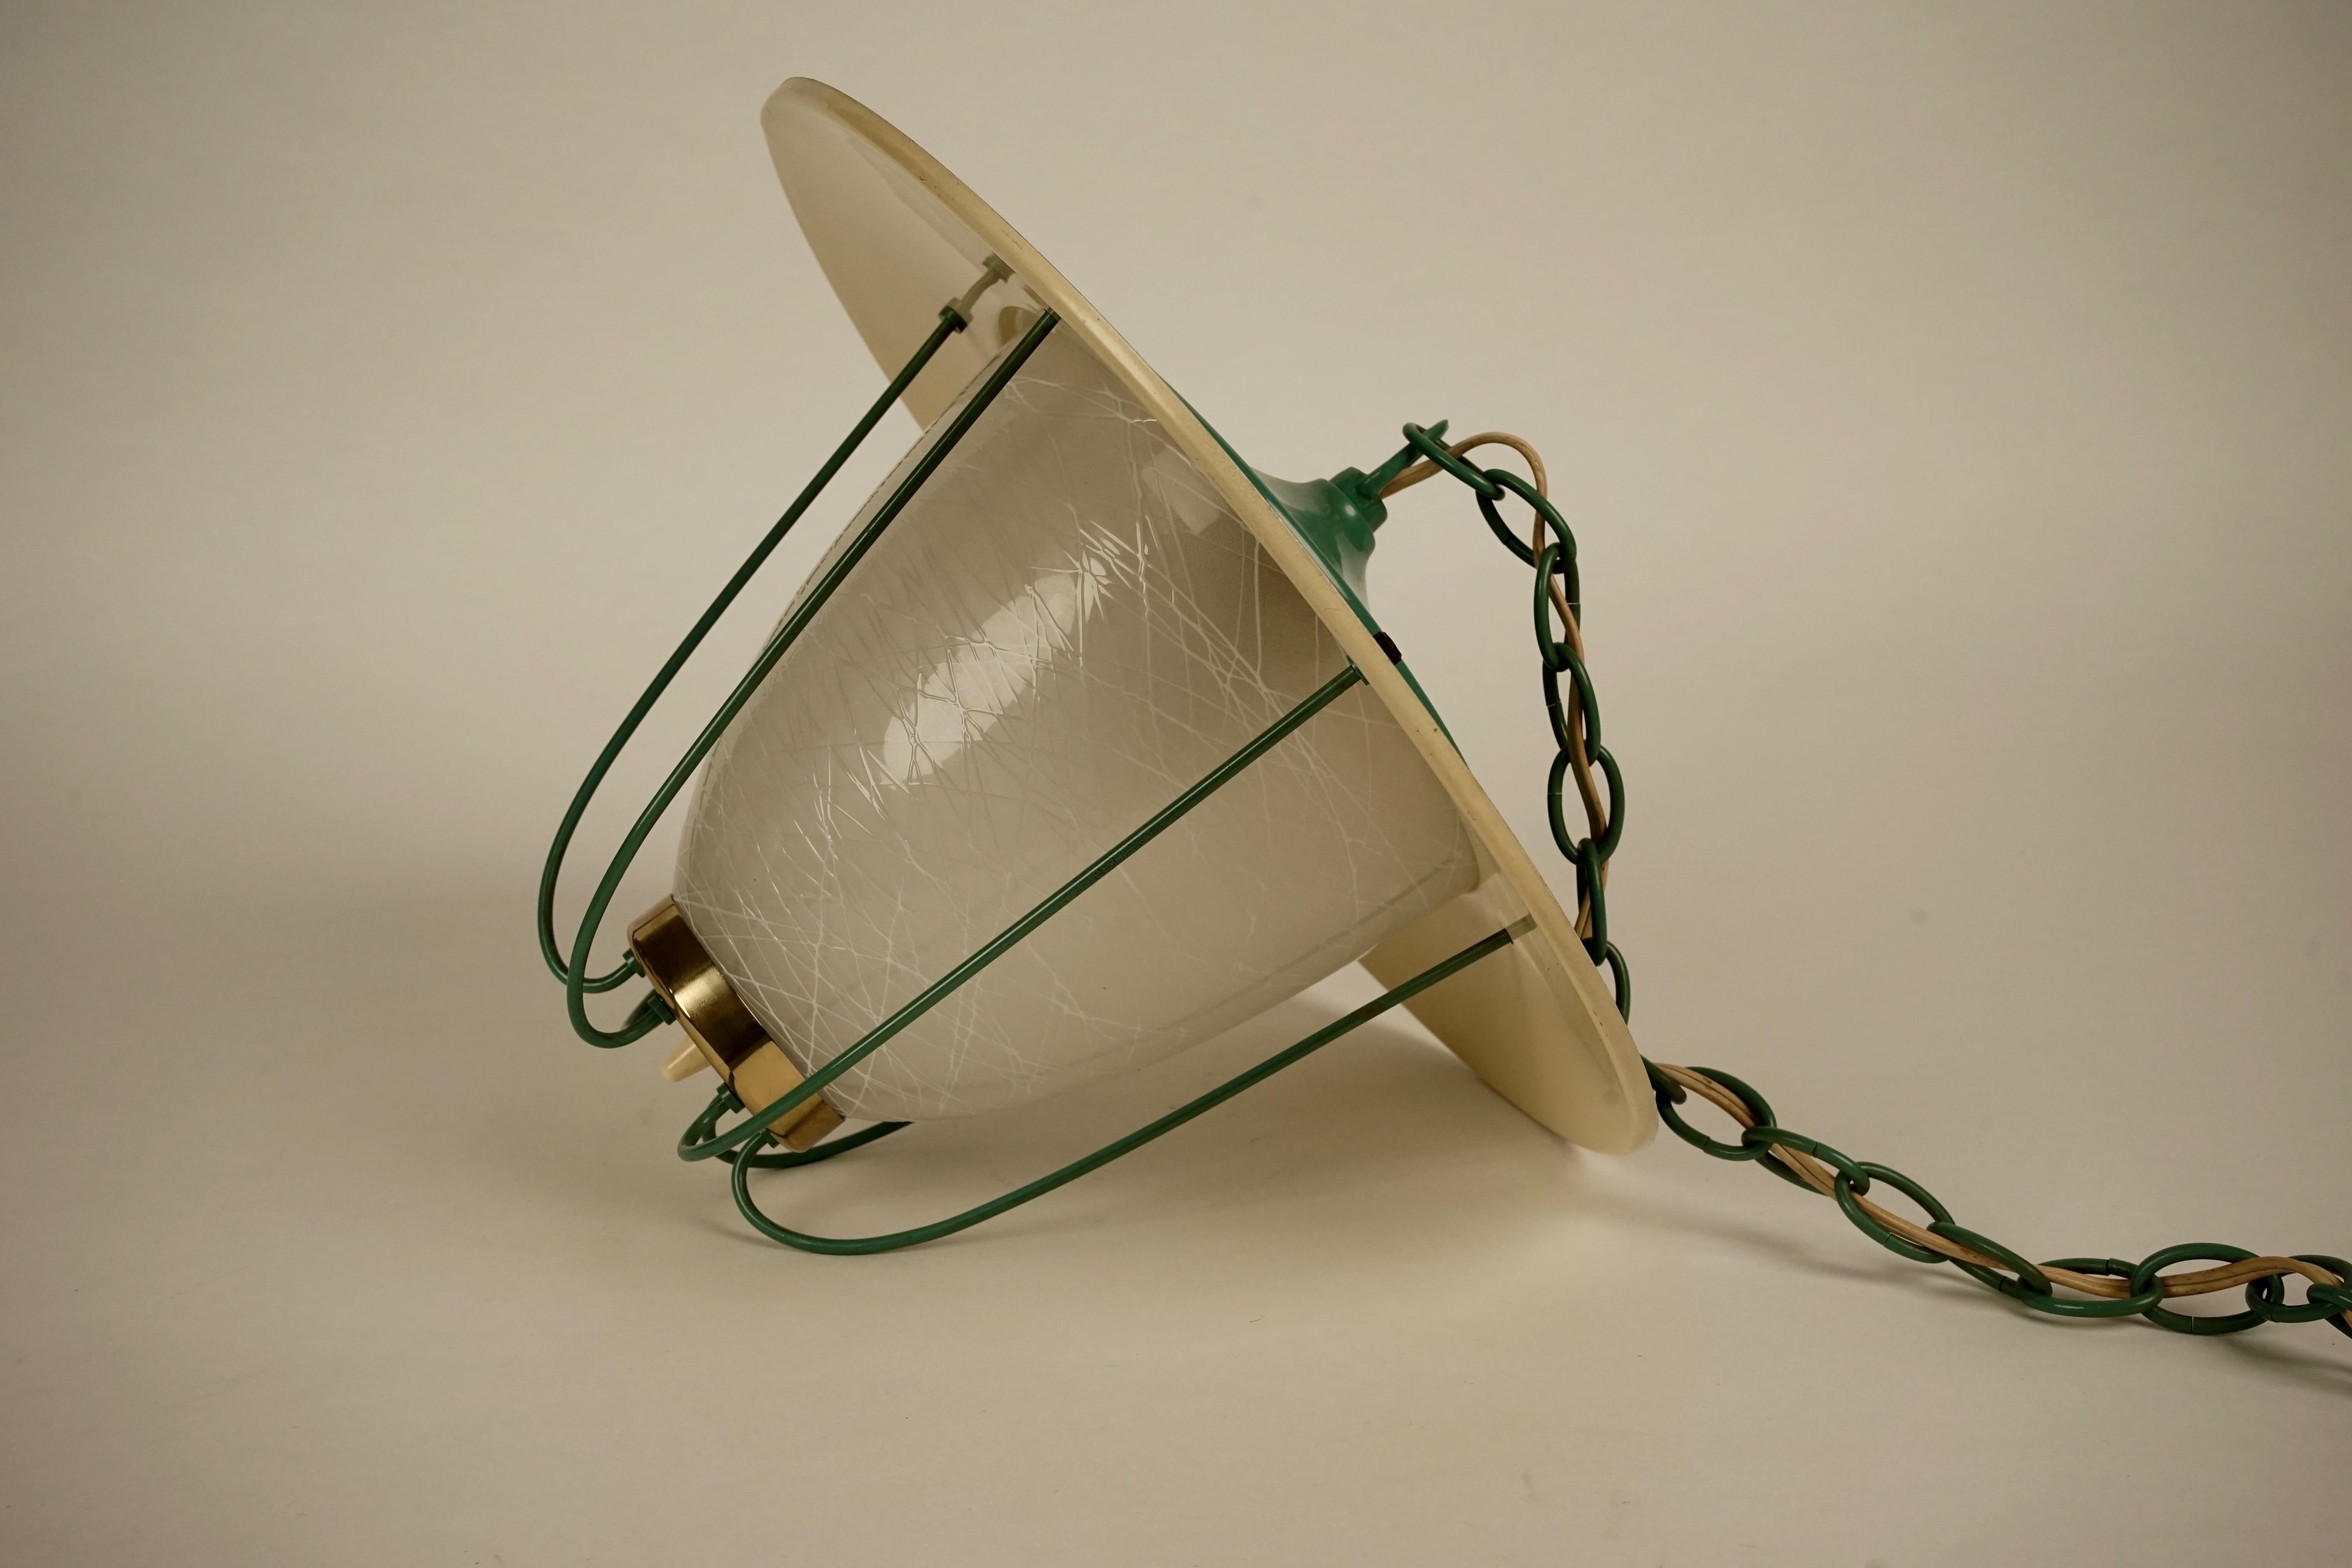 This Tokio lamp from Kalmar is in wonderful condition. The metal top, chain ceiling cup and cage are sprayed linden green, the glass has been frosted with a pattern. The cage is held to the top with elegant metal balls and at the bottom to a brass